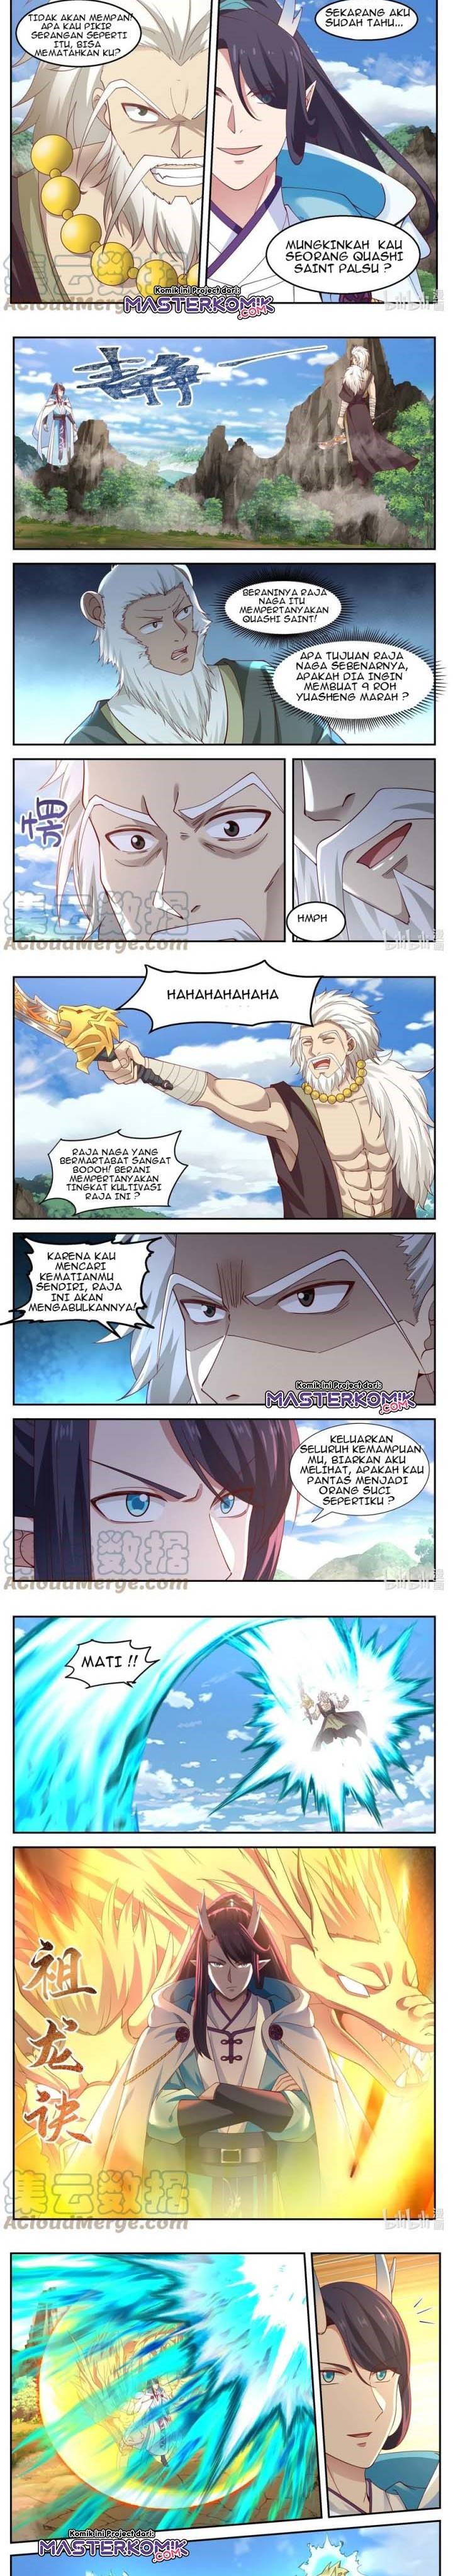 Dragon Throne Chapter 113